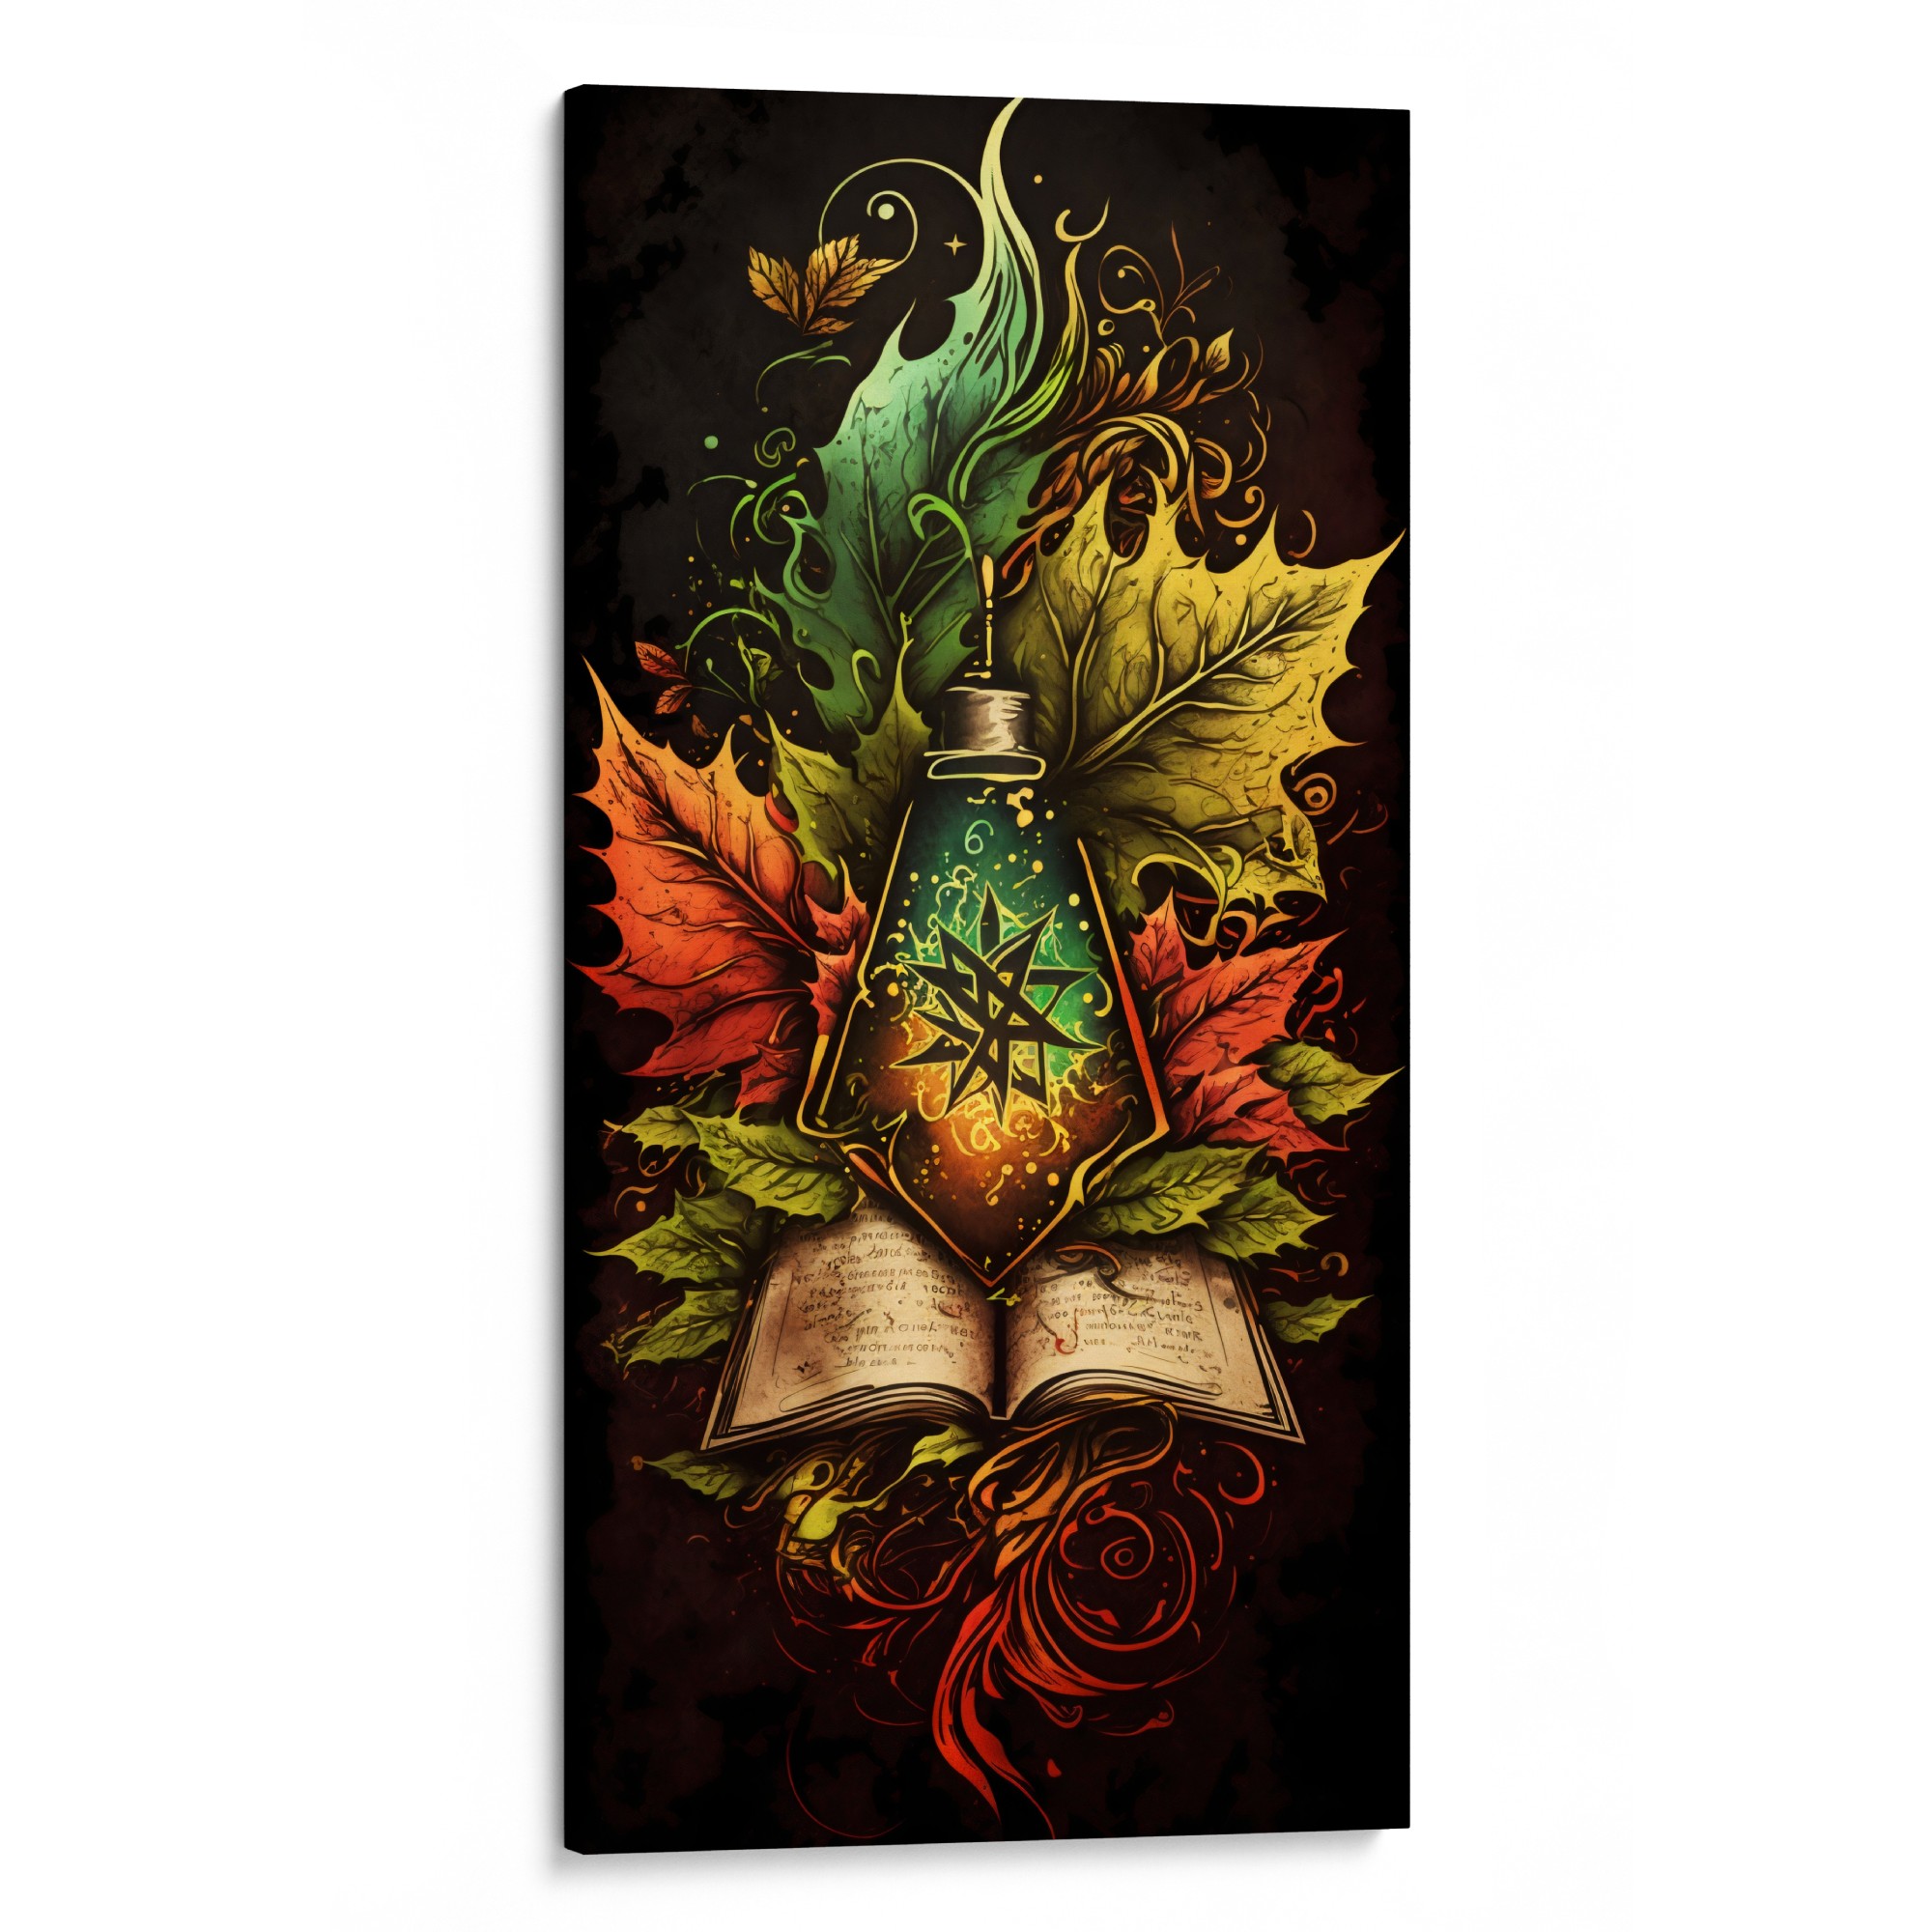 GRIMOIRE Canvas - The lore of ancient potions brought to life for art enthusiasts.